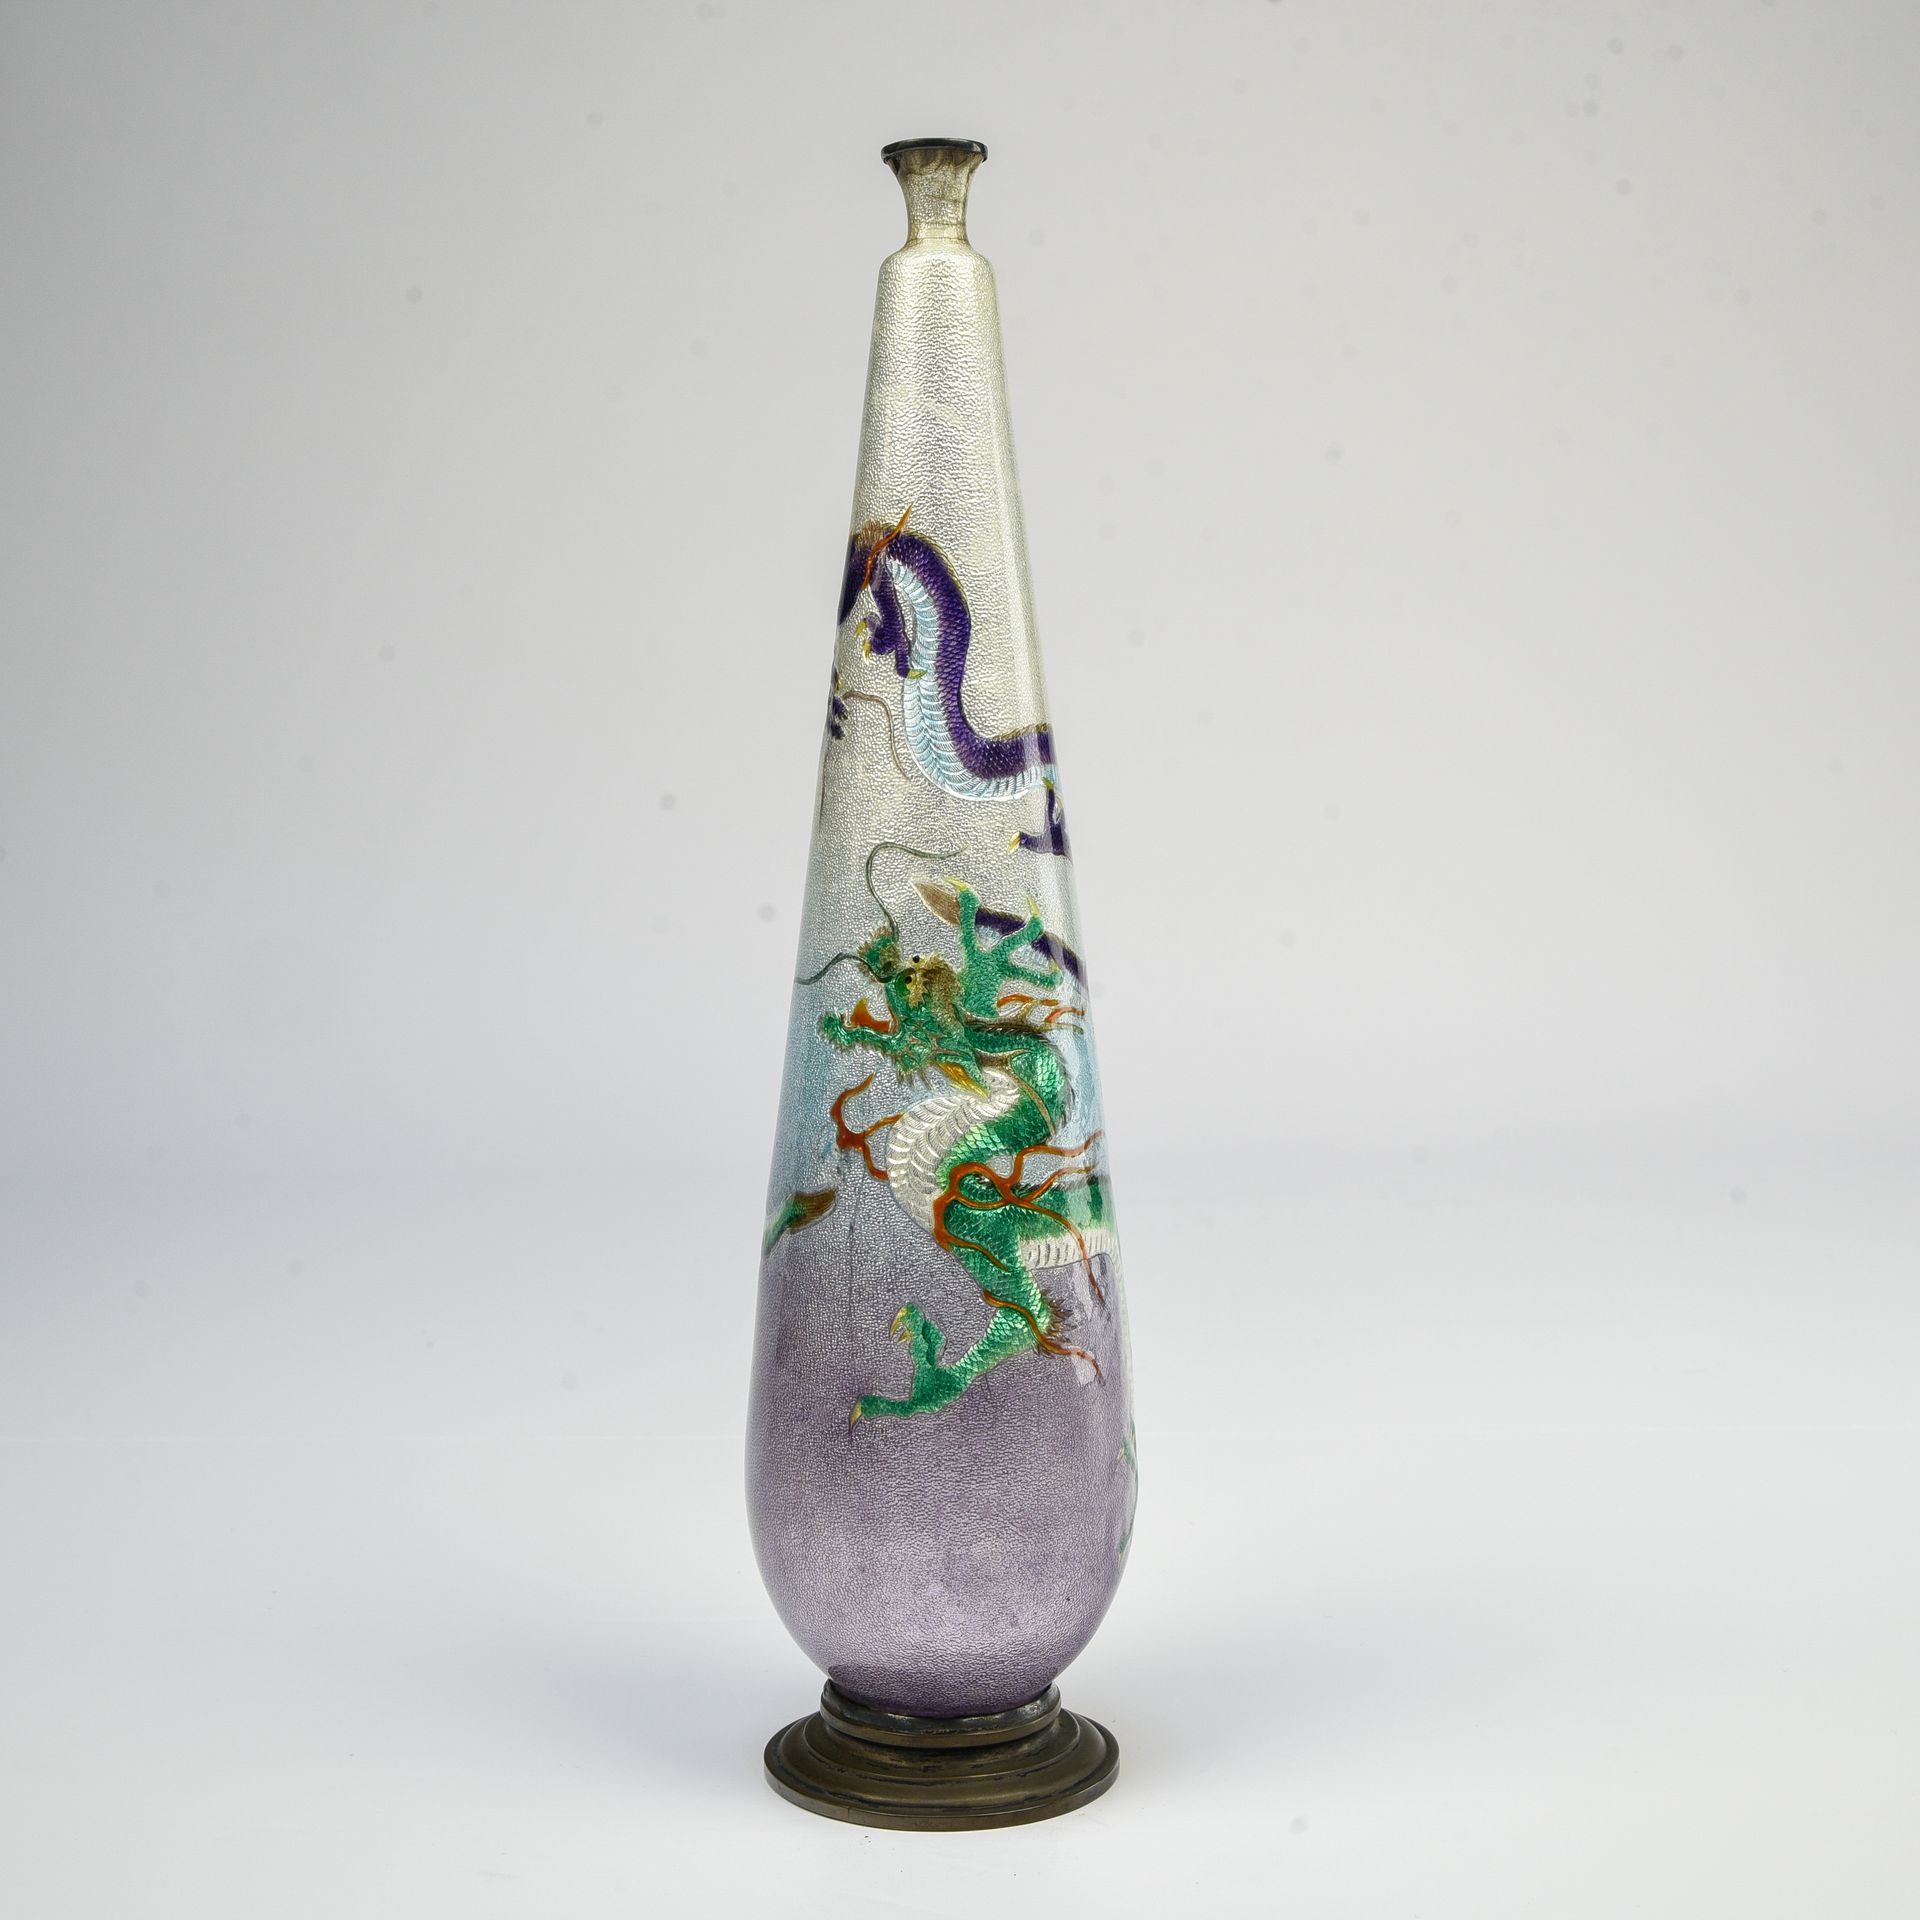 Null Bud vase

CHINA - EARLY 20TH CENTURY

Enamelled metal with relief décor of &hellip;